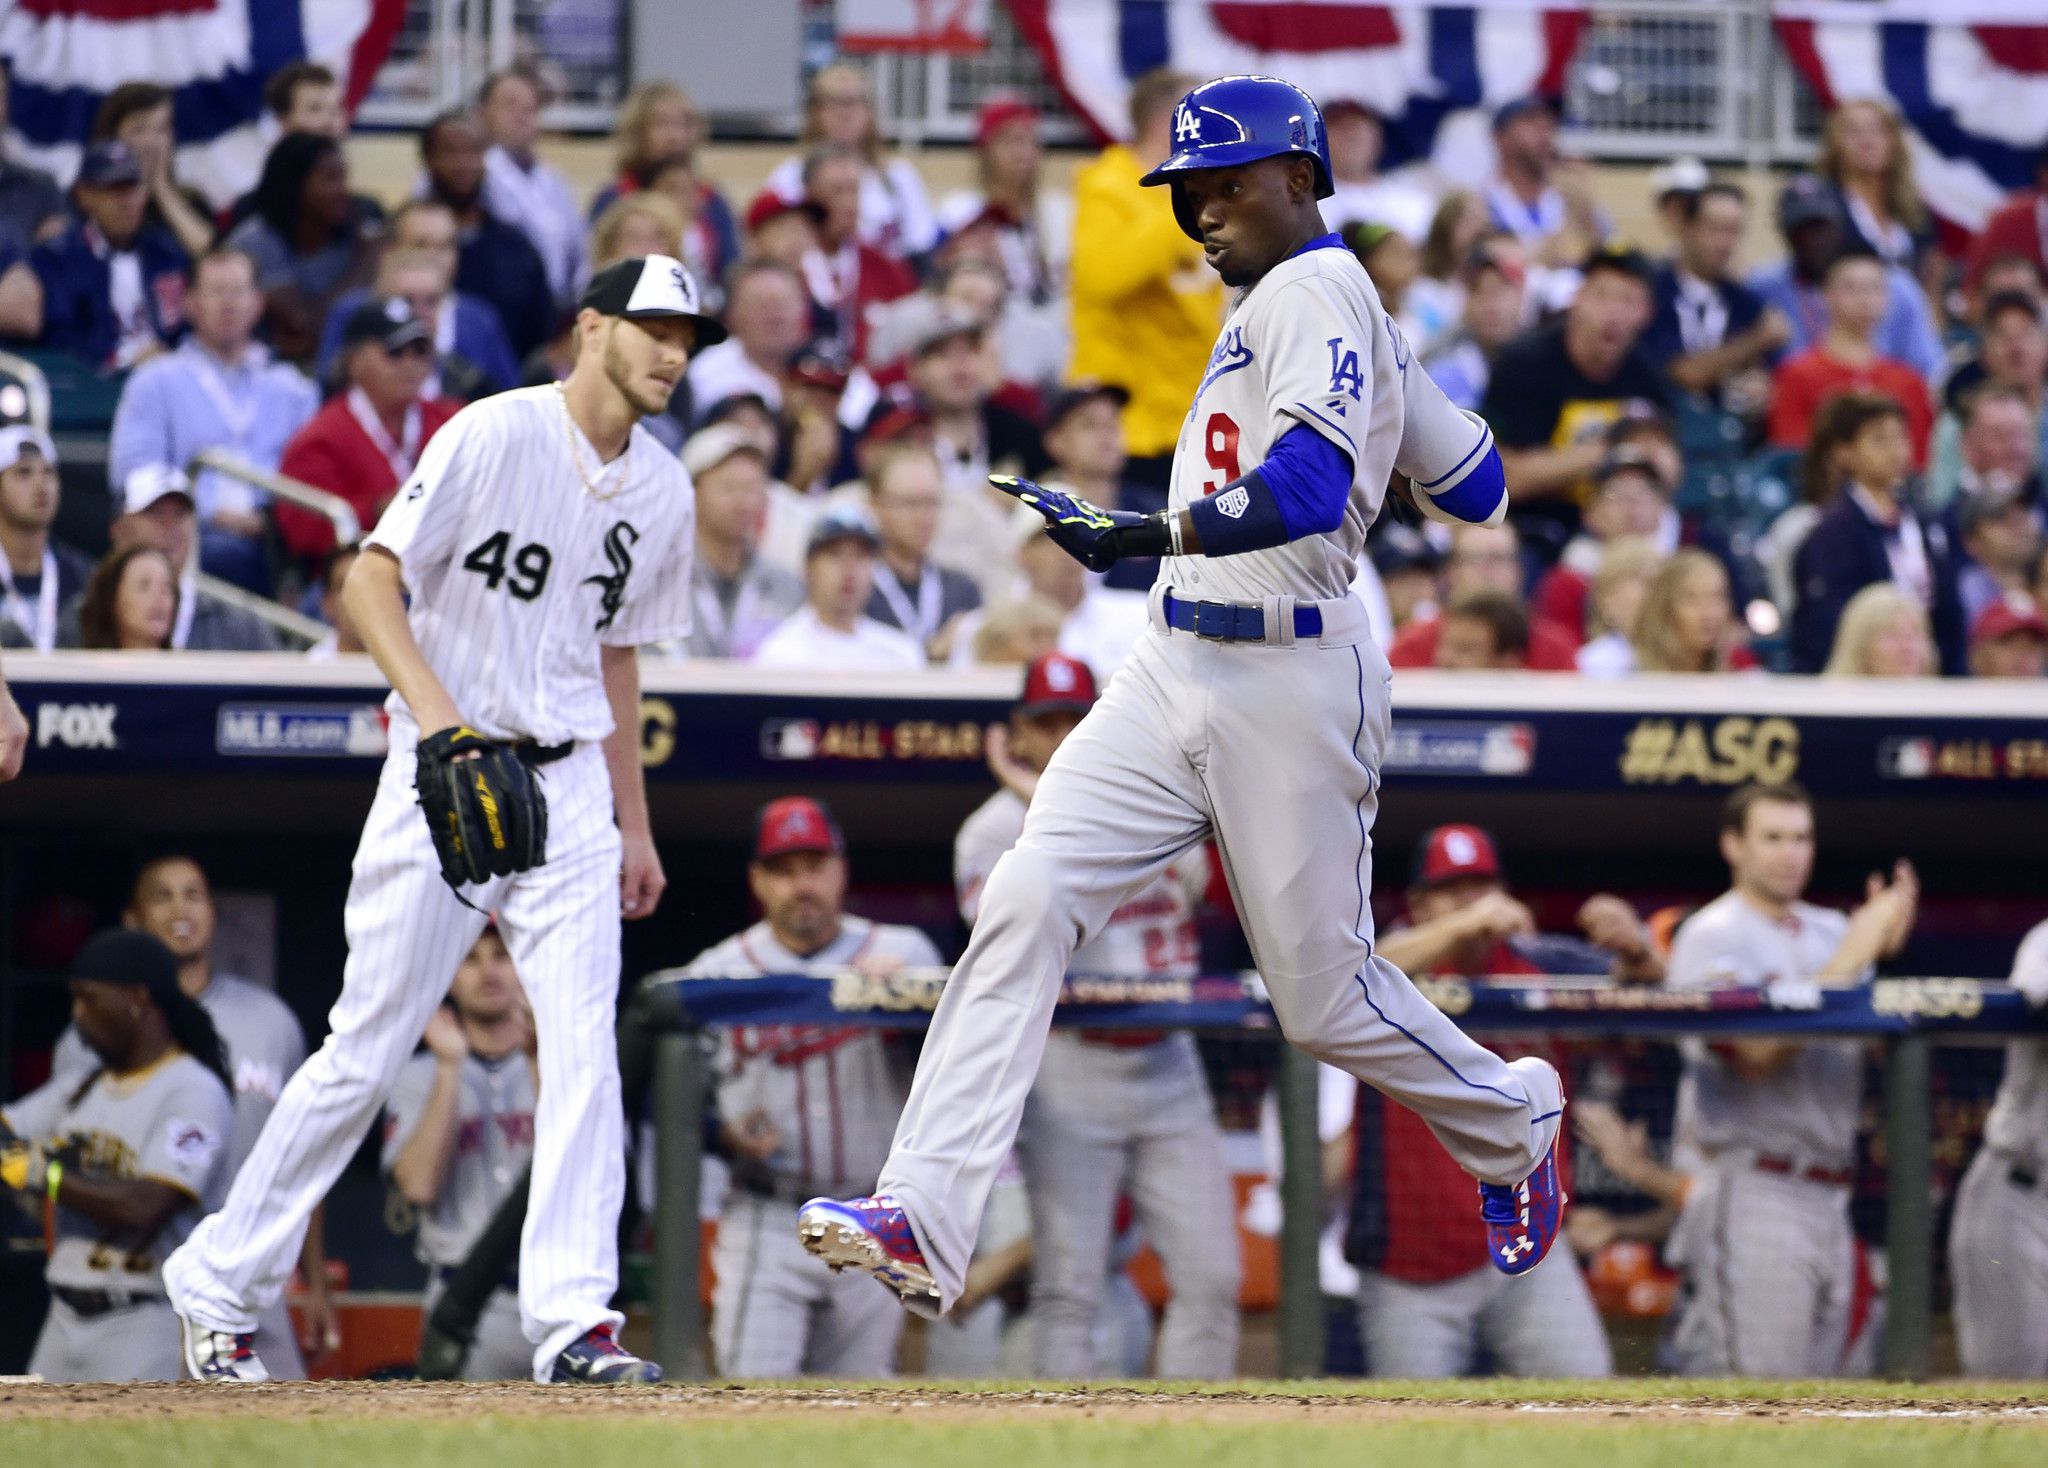 Photos: Cubs, White Sox at 2014 All-Star Game -- Chicago Tribune